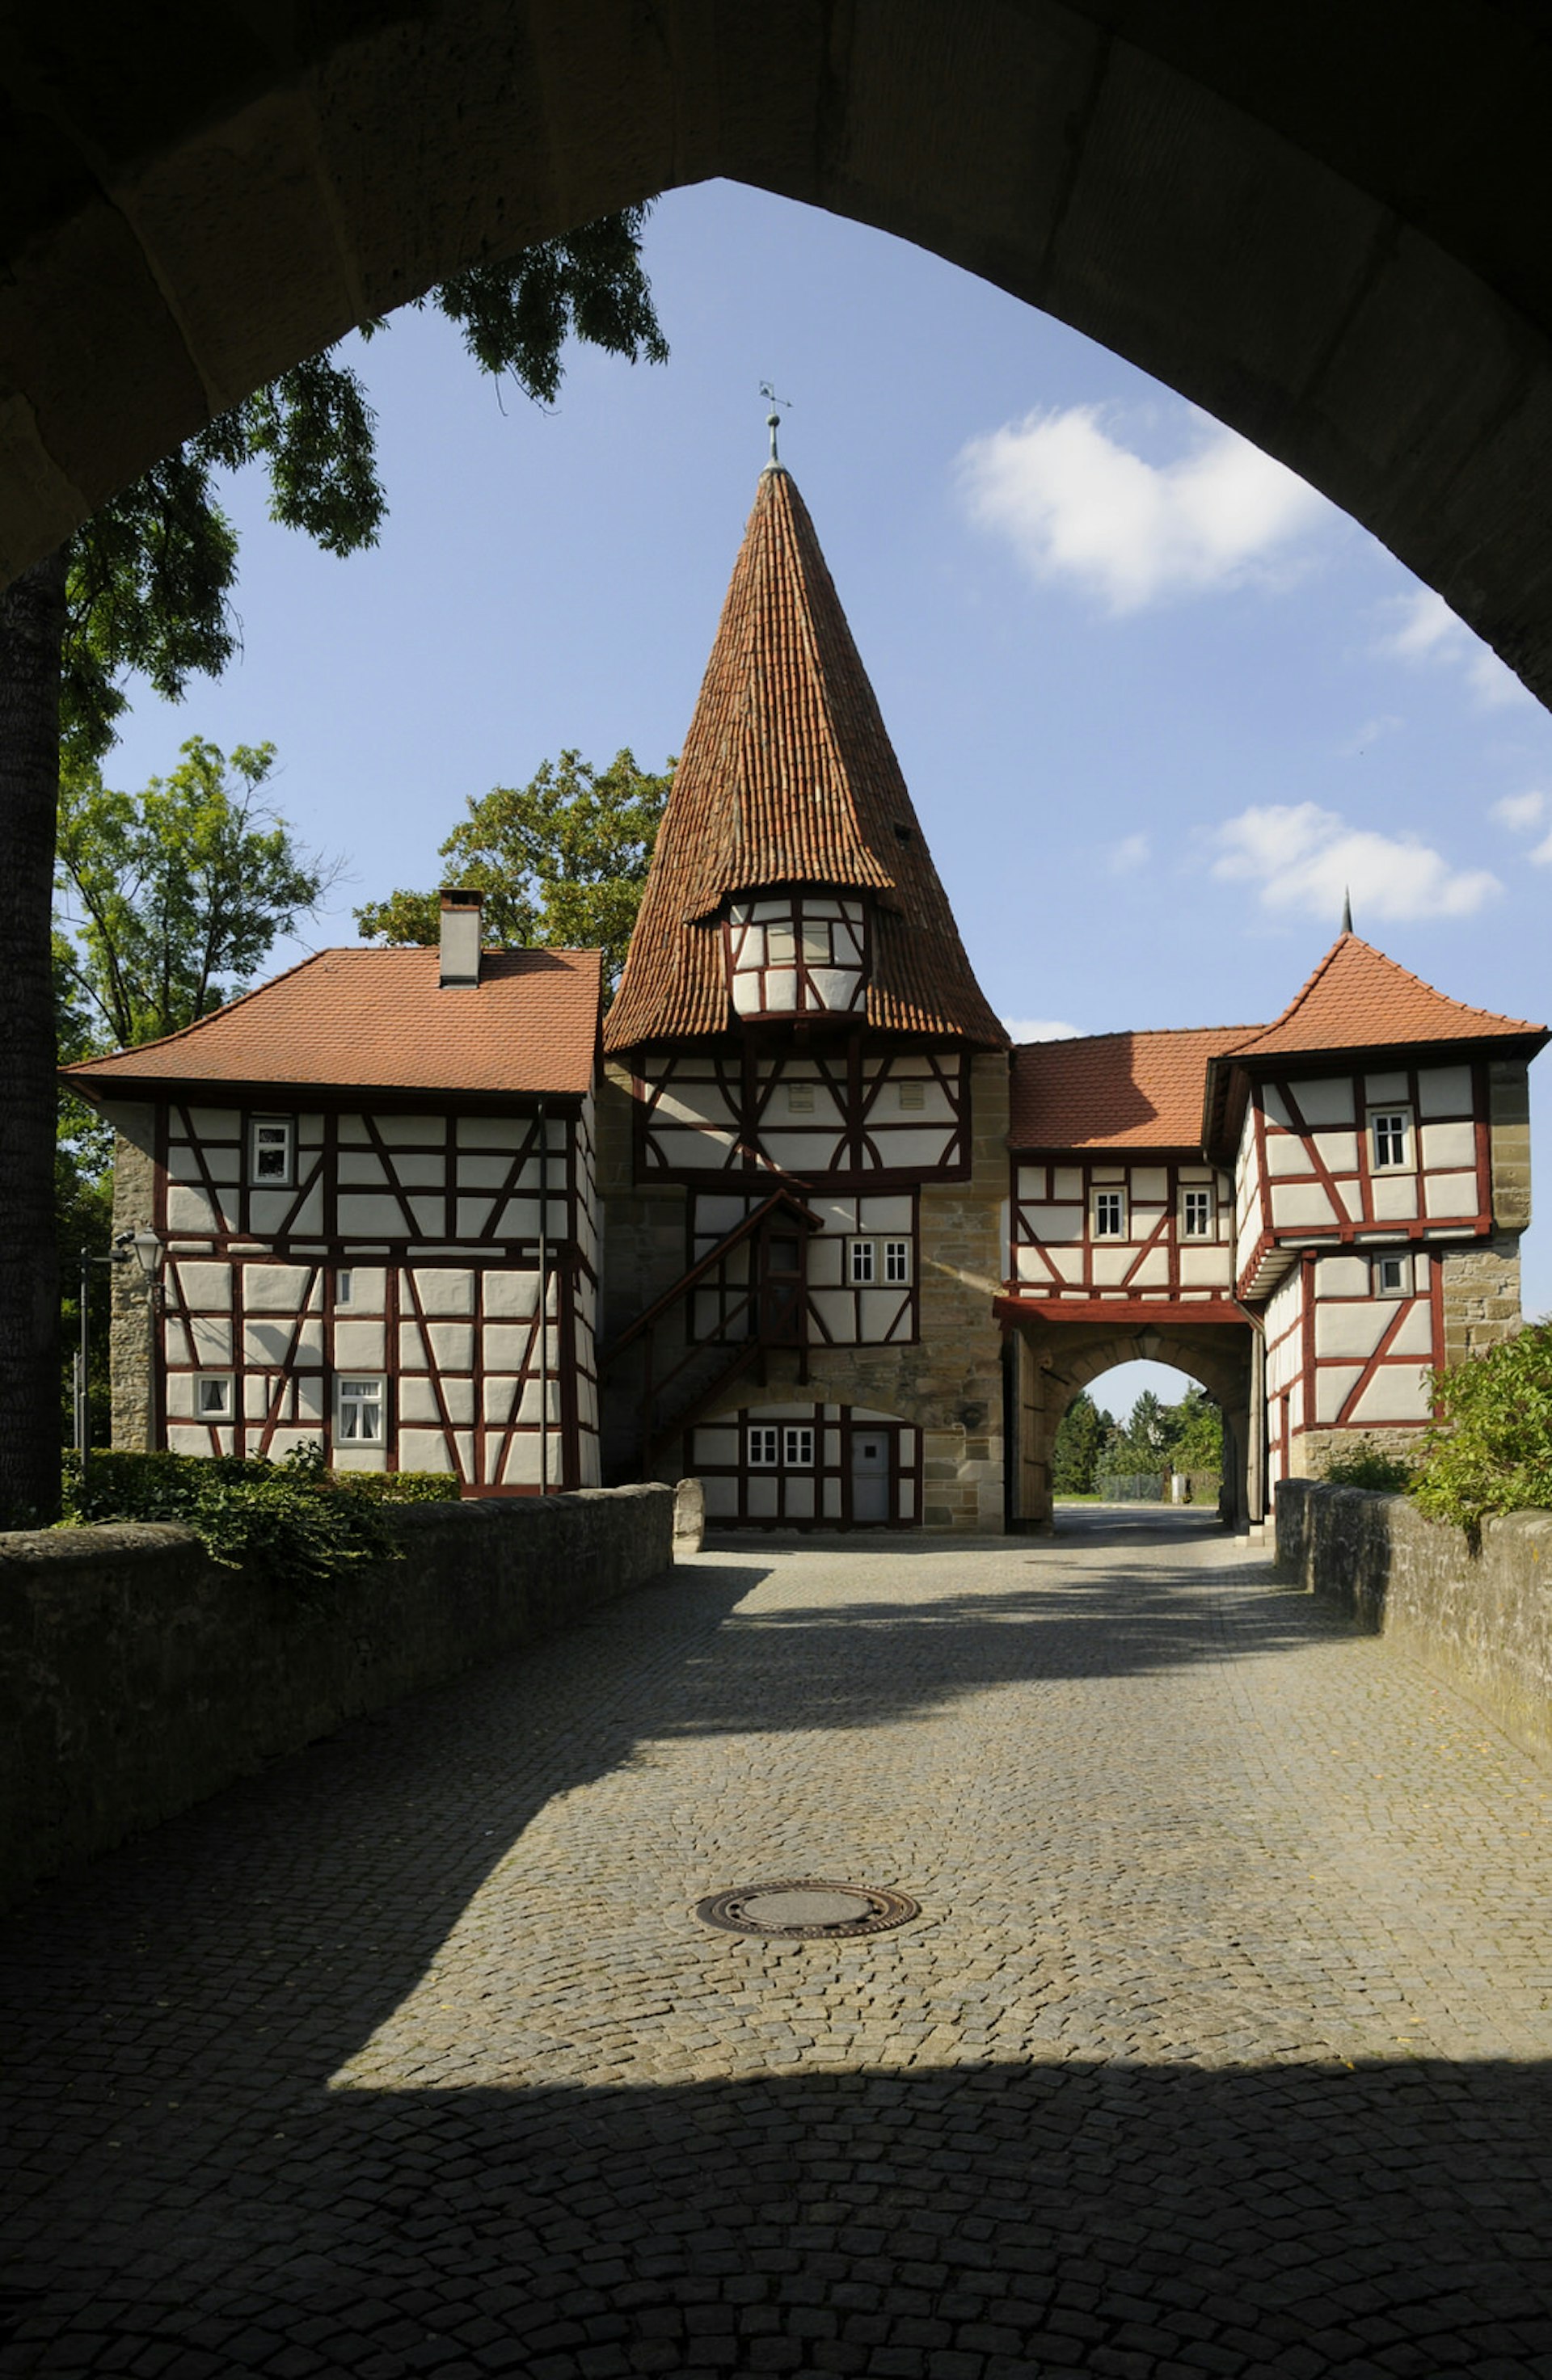 Picture perfect Roedelseer Gate in Iphofen. An archway frames a timbered house and a cobbled street